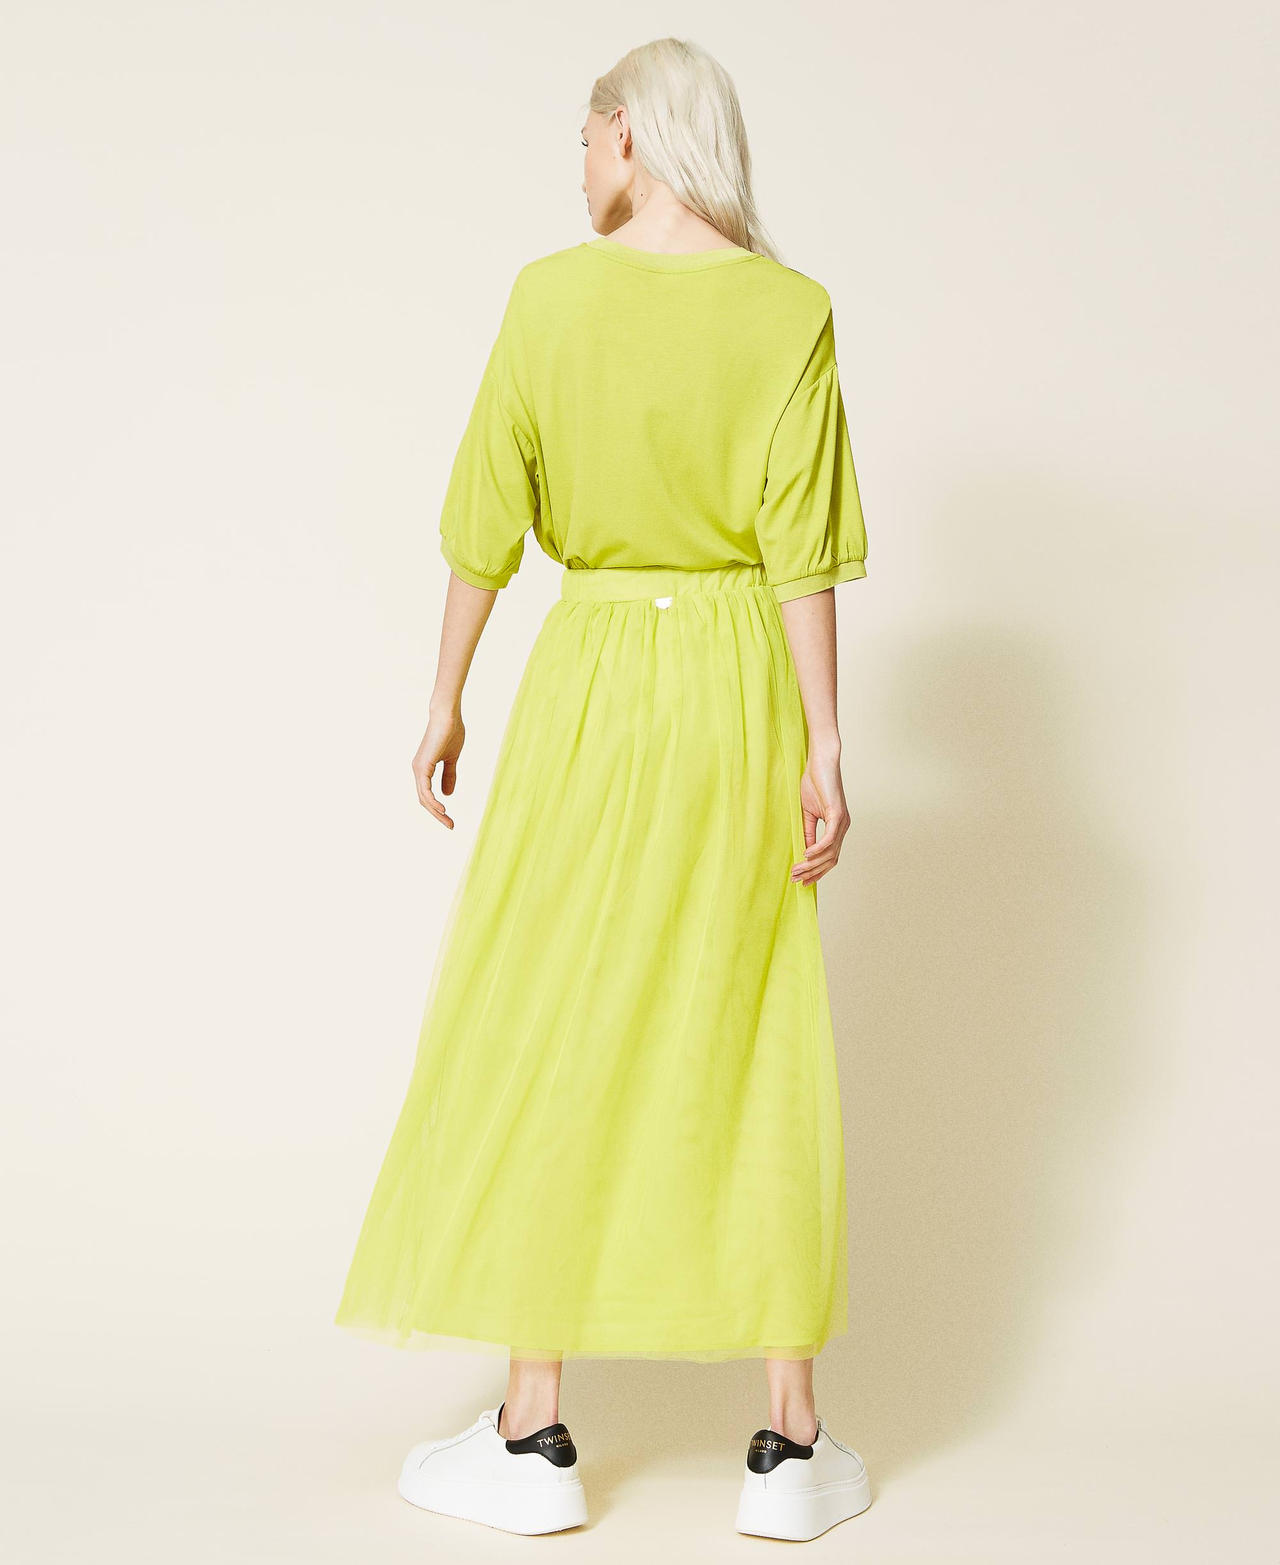 Gonna lunga in tulle plissé Verde "Green Oasis" Donna 221LL28XX-03